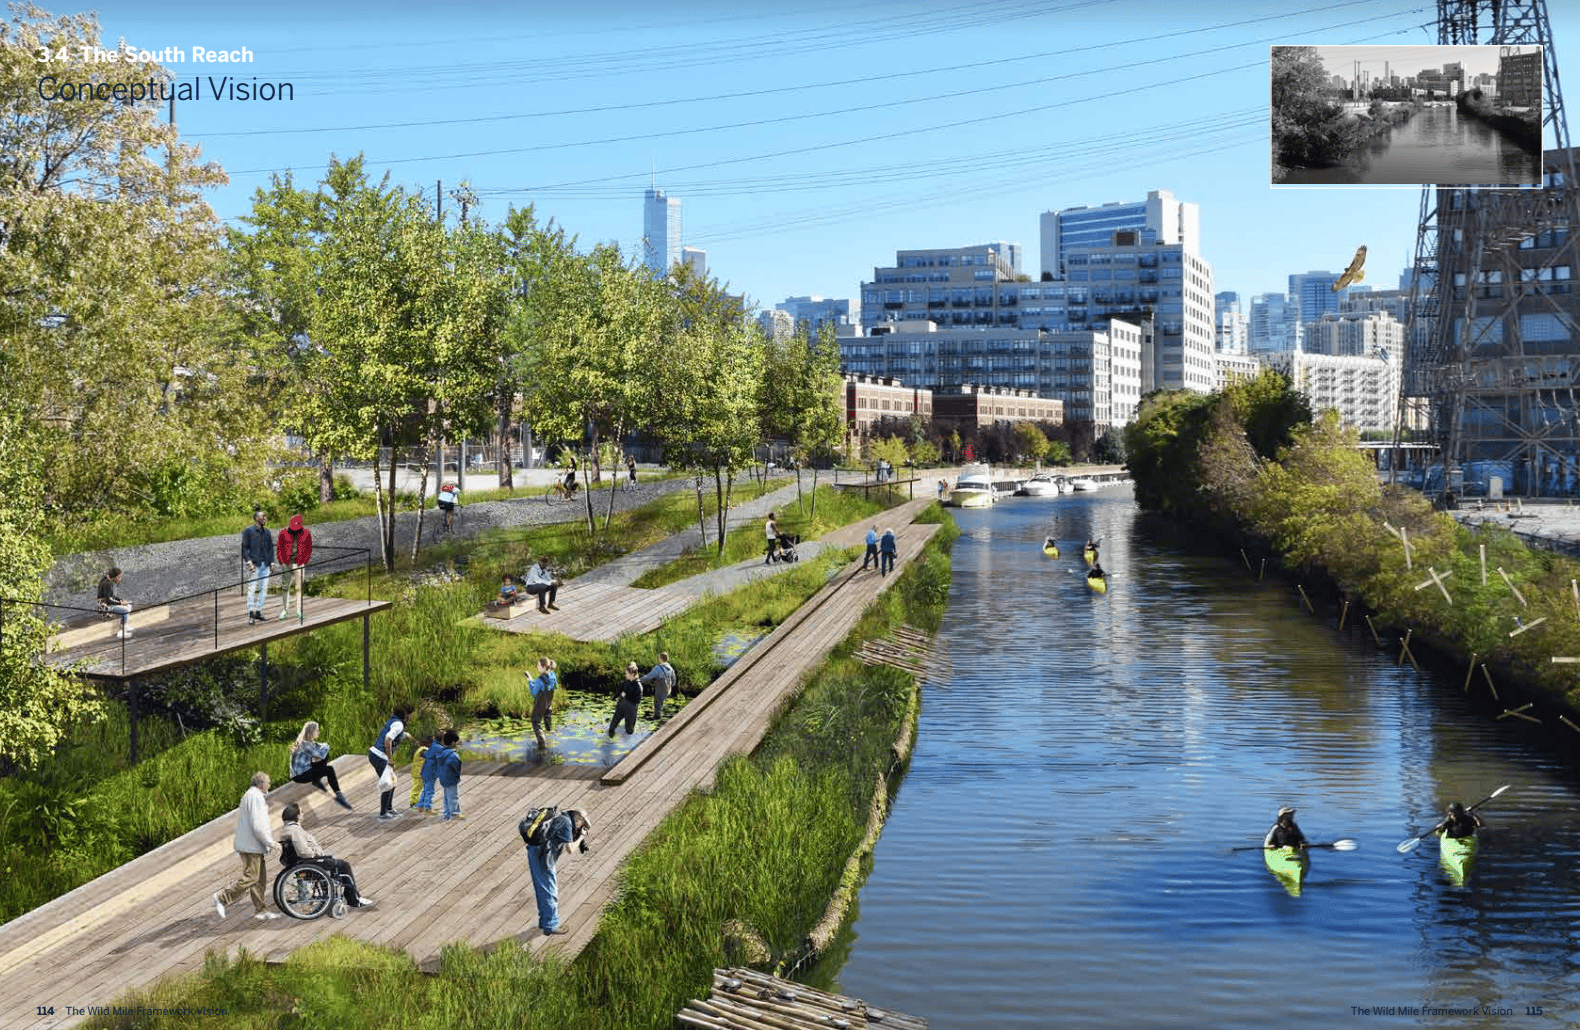 Rendering of the proposed project shows river view and garden walkway